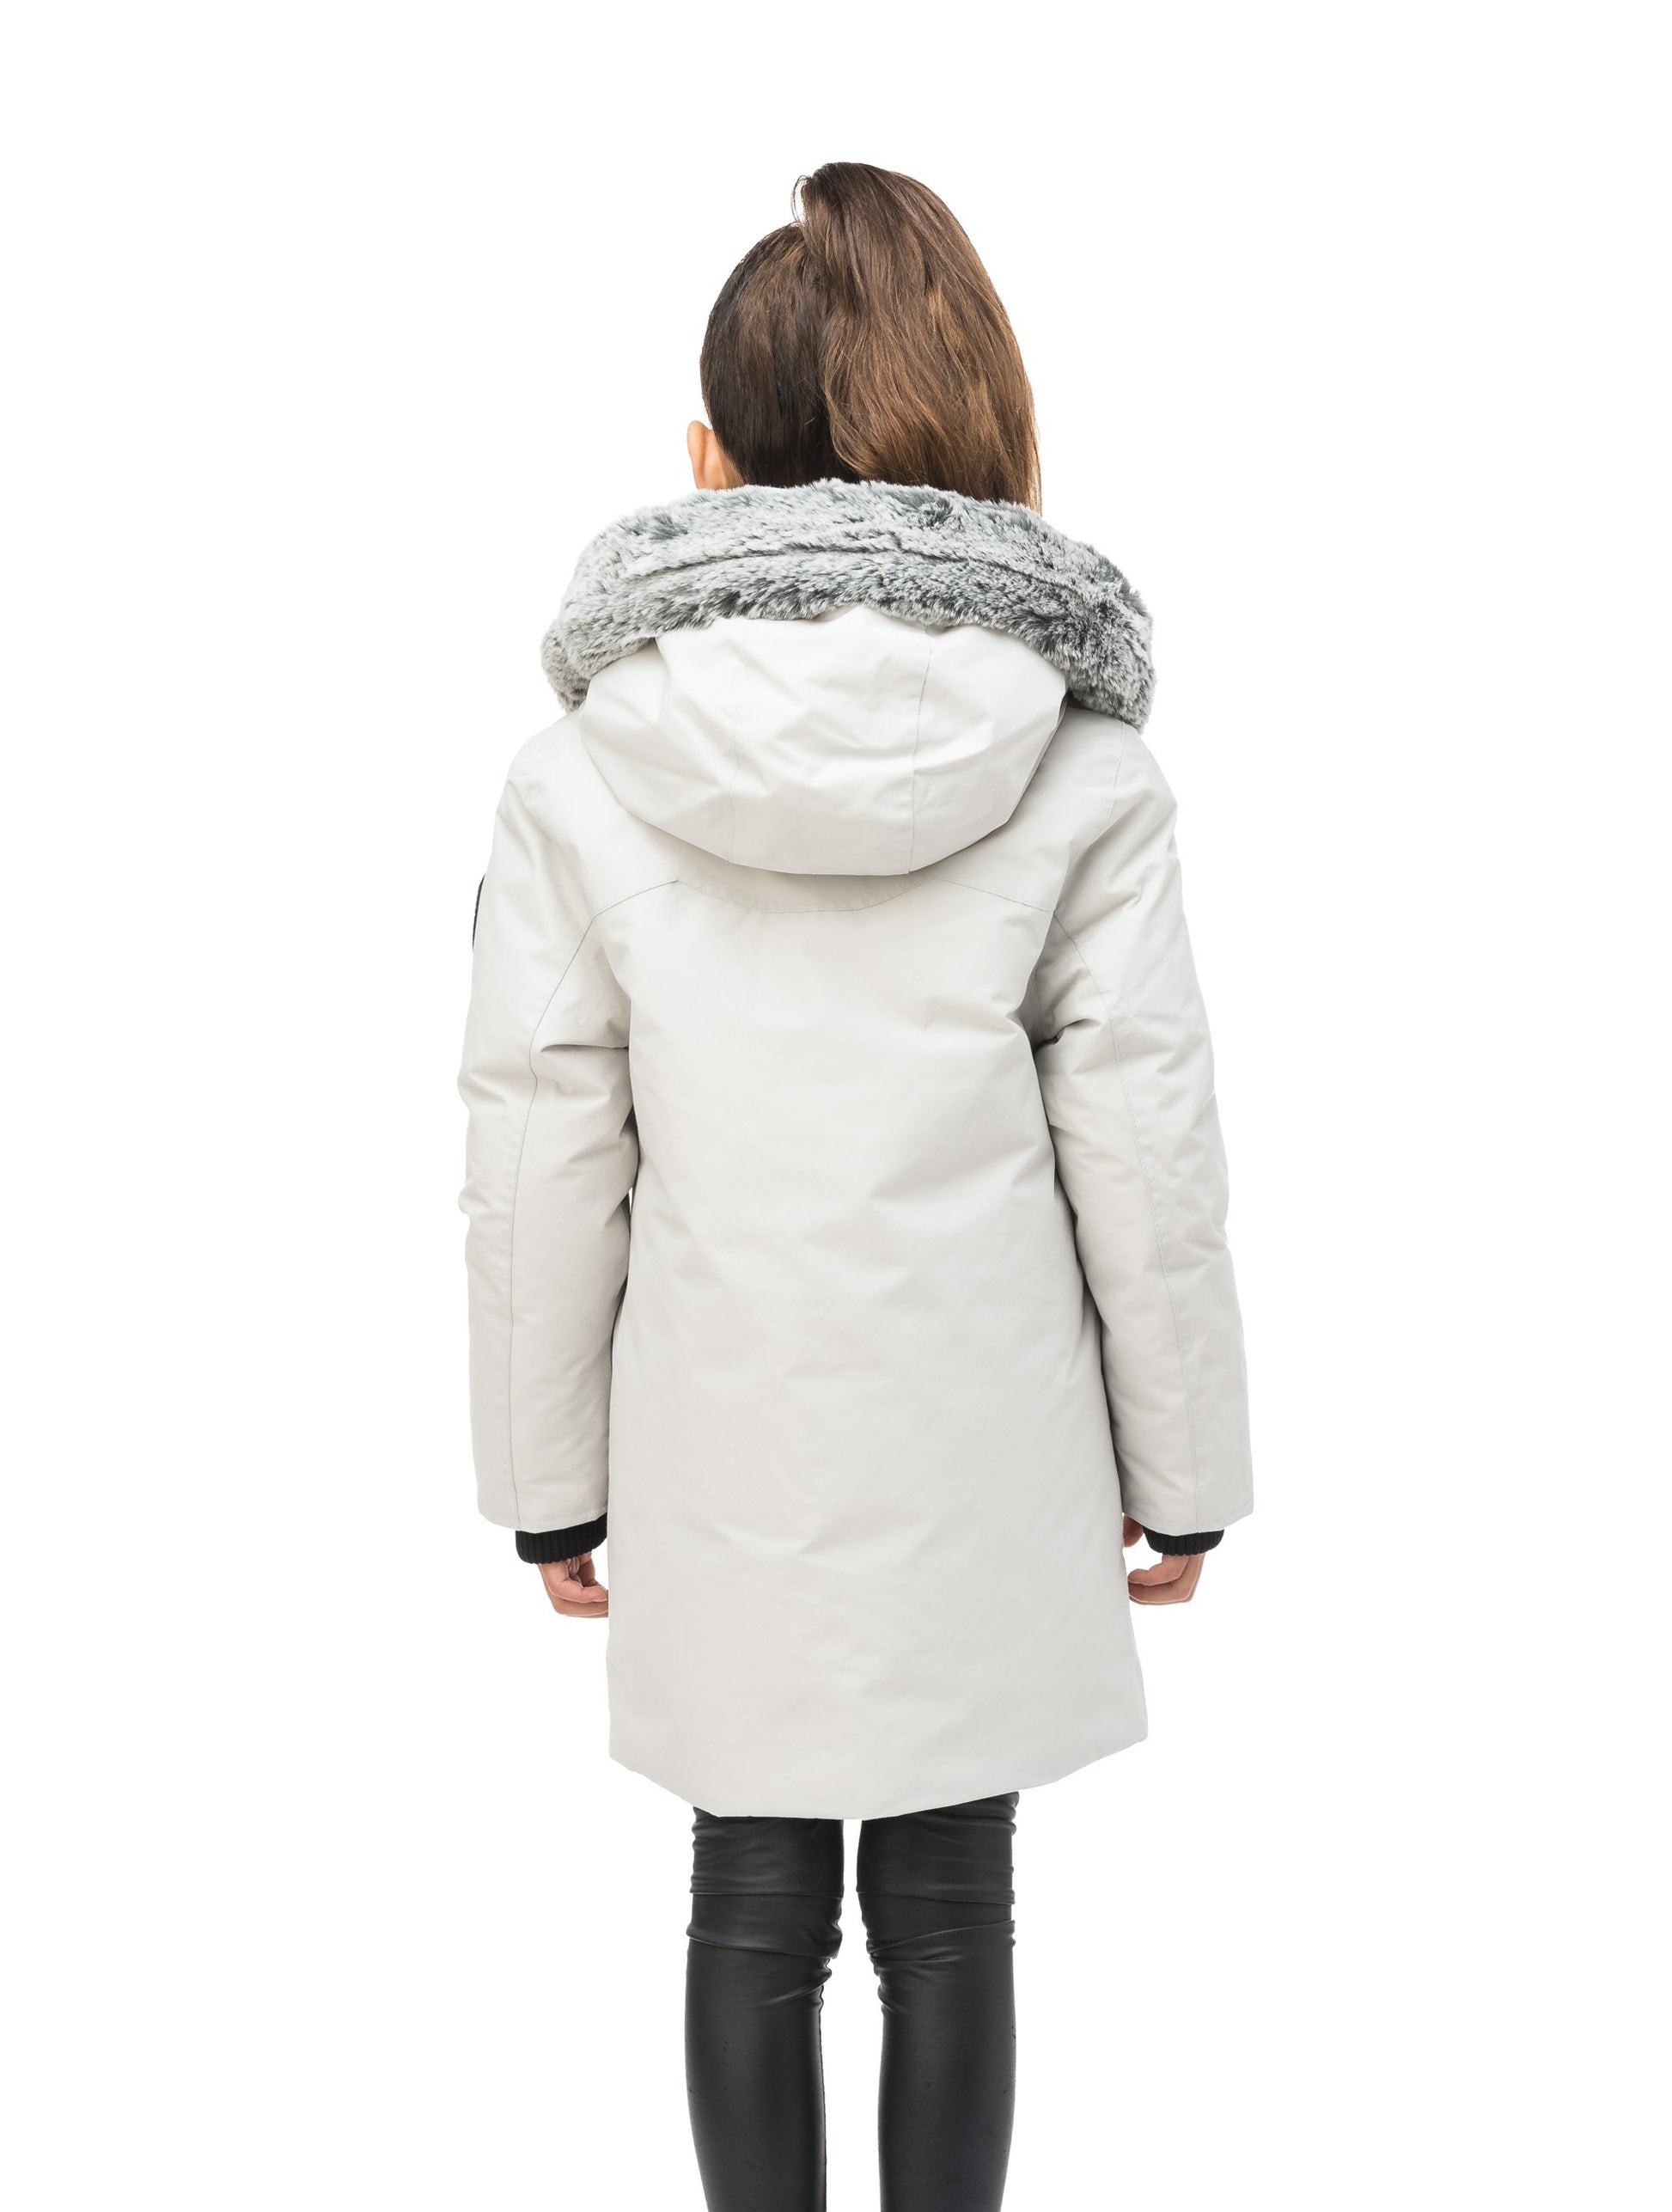 Kid's knee length down filled parka with deer applique detailing on the front patch pockets in Light Grey